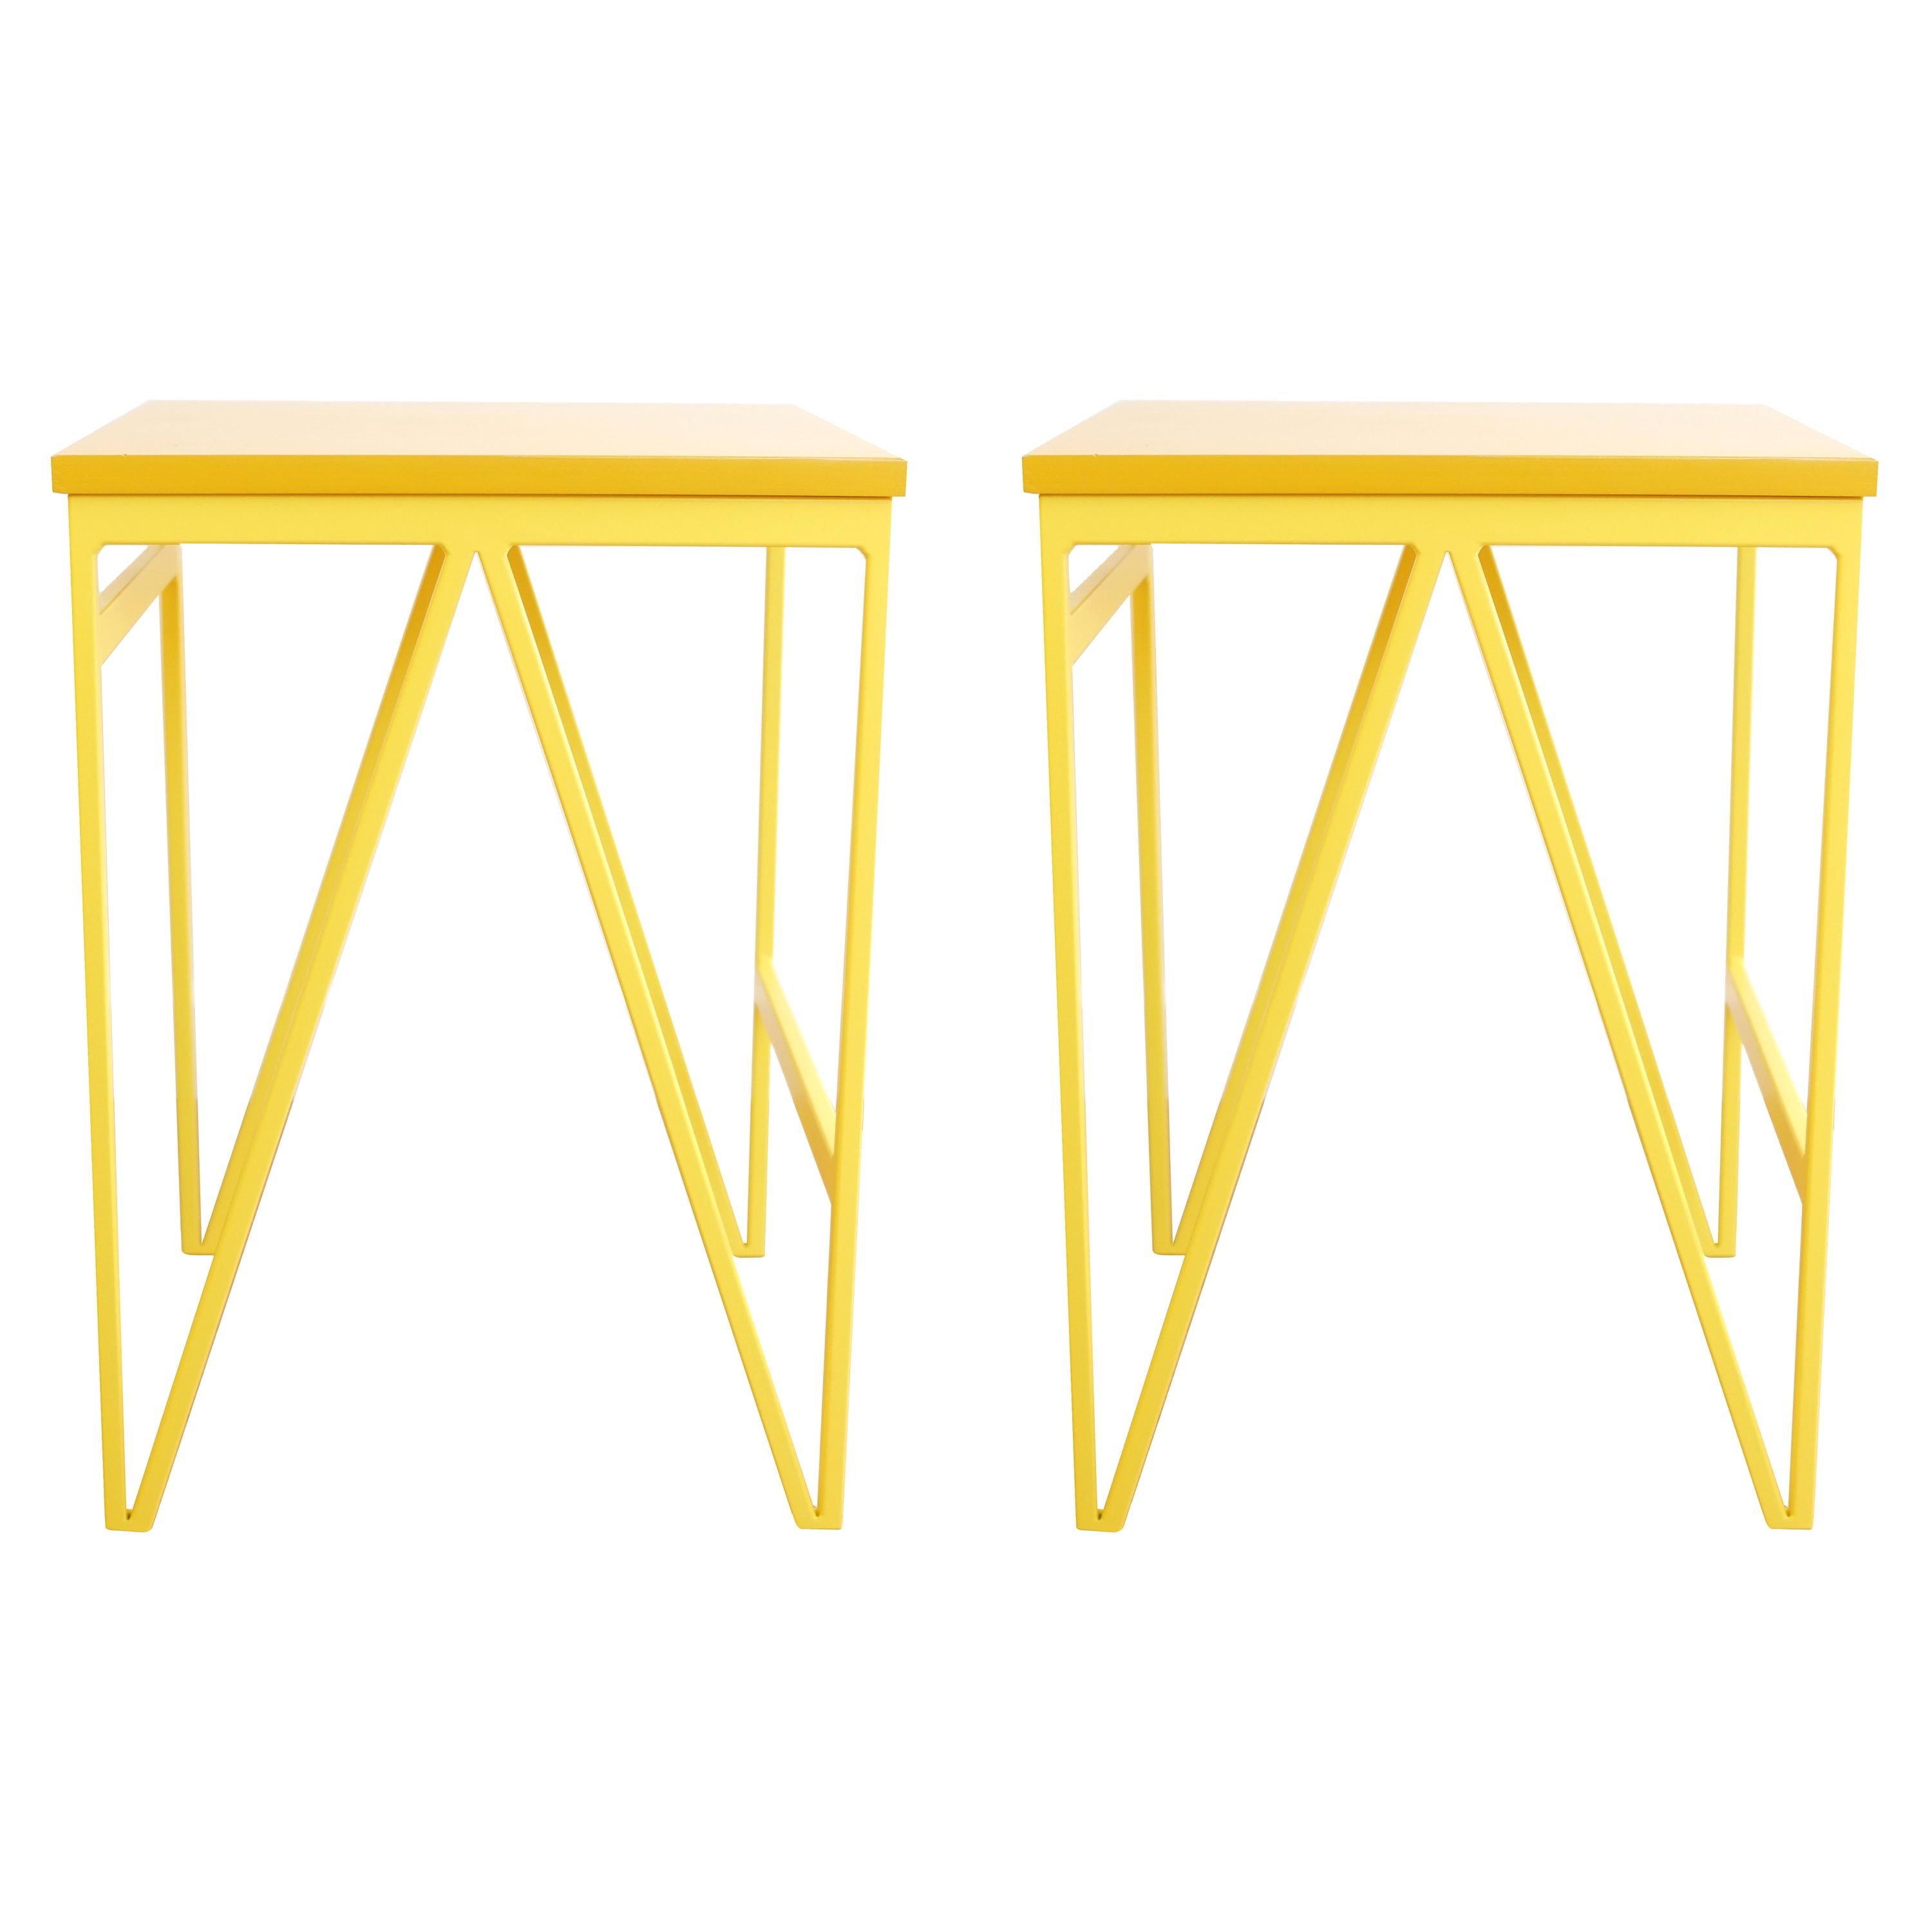 Pair of Steel and Wood Stools - Yellow Color Play Stools